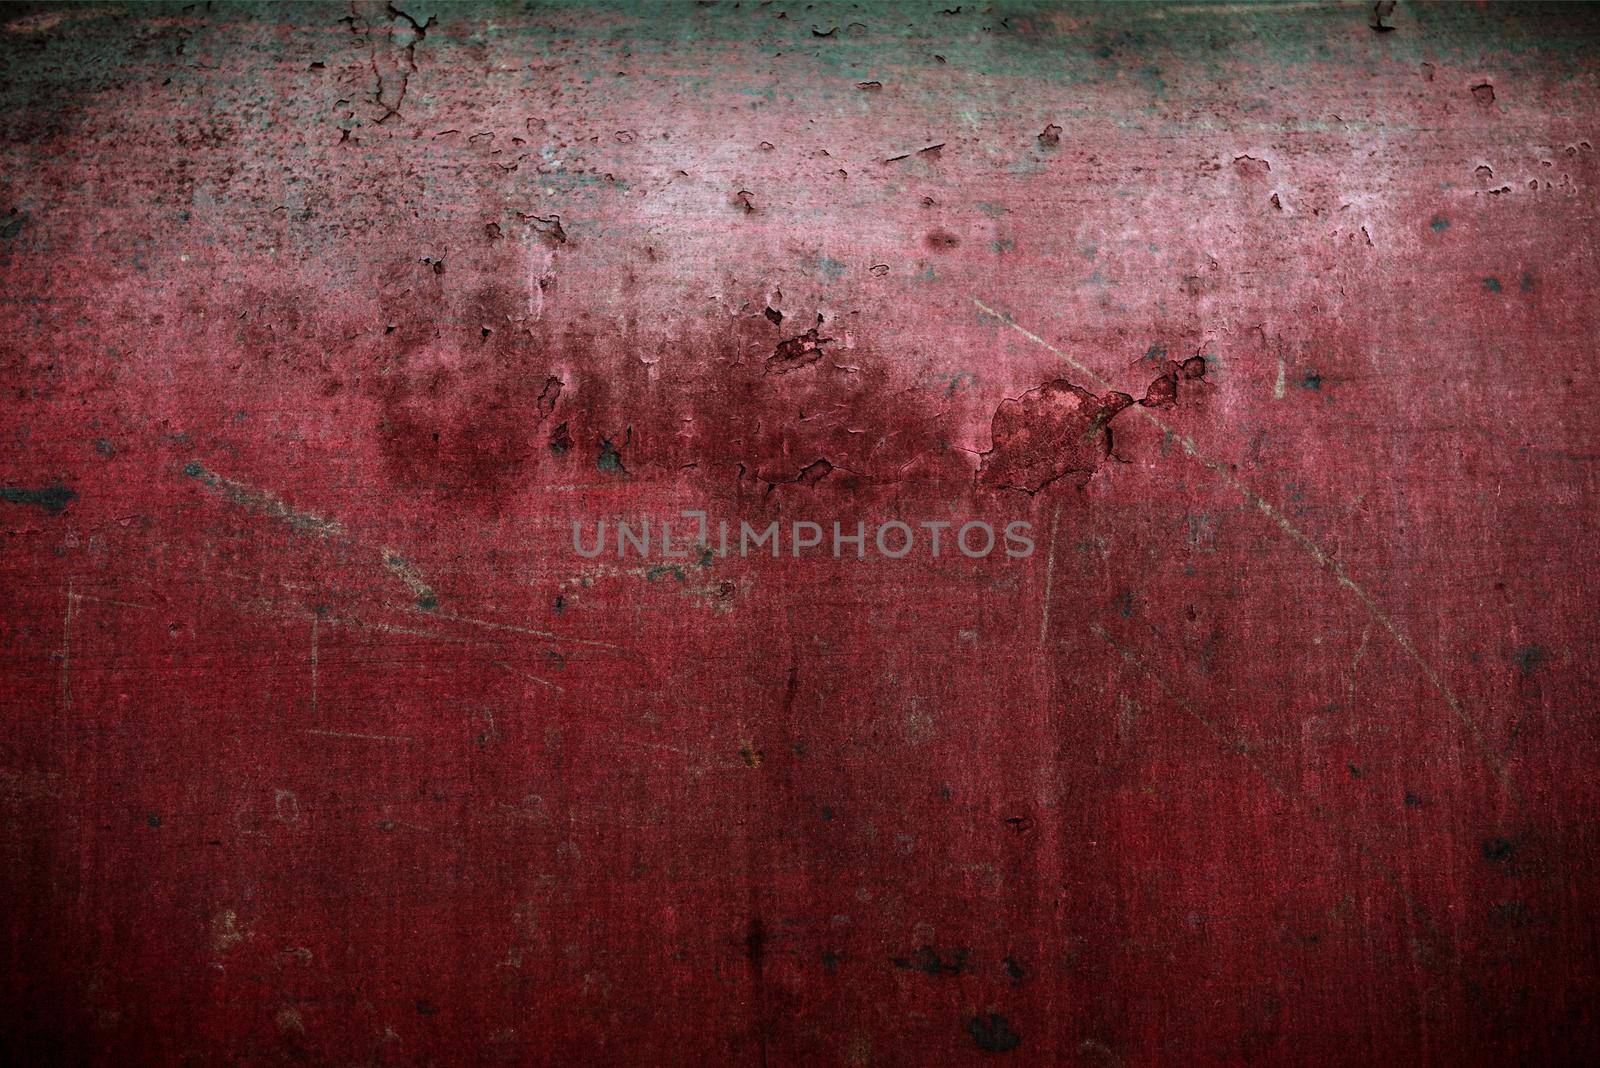 Reddish Grunge Metal Background. Rustic Metal Surface. Grunge Backgrounds Collection.